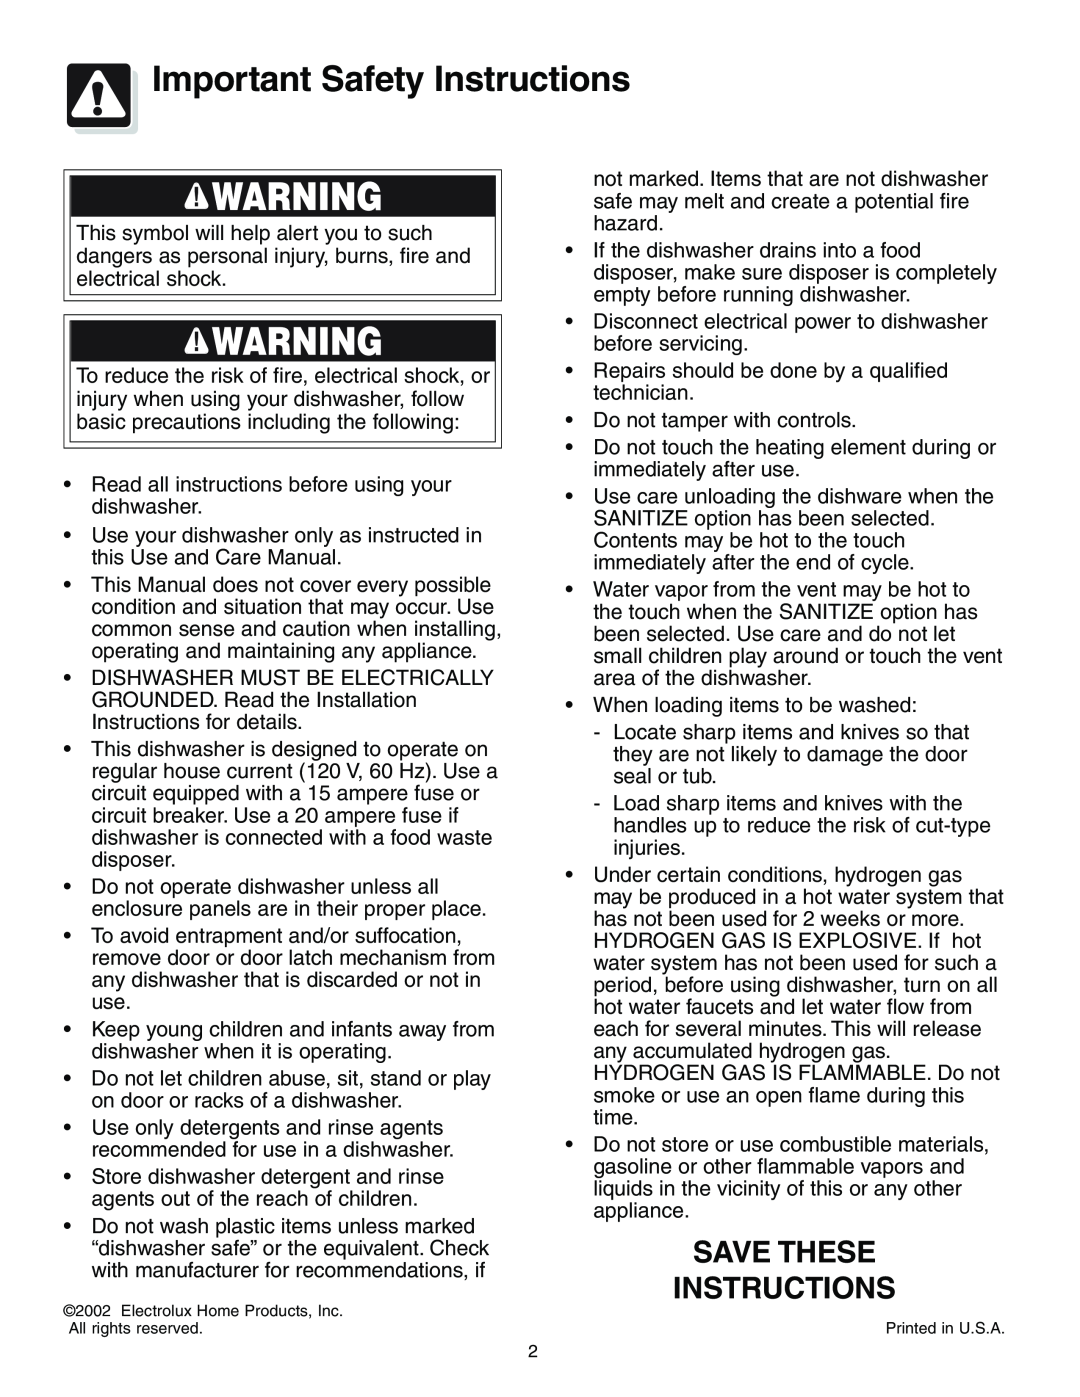 Frigidaire 650 Series warranty Important Safety Instructions, Save These Instructions 